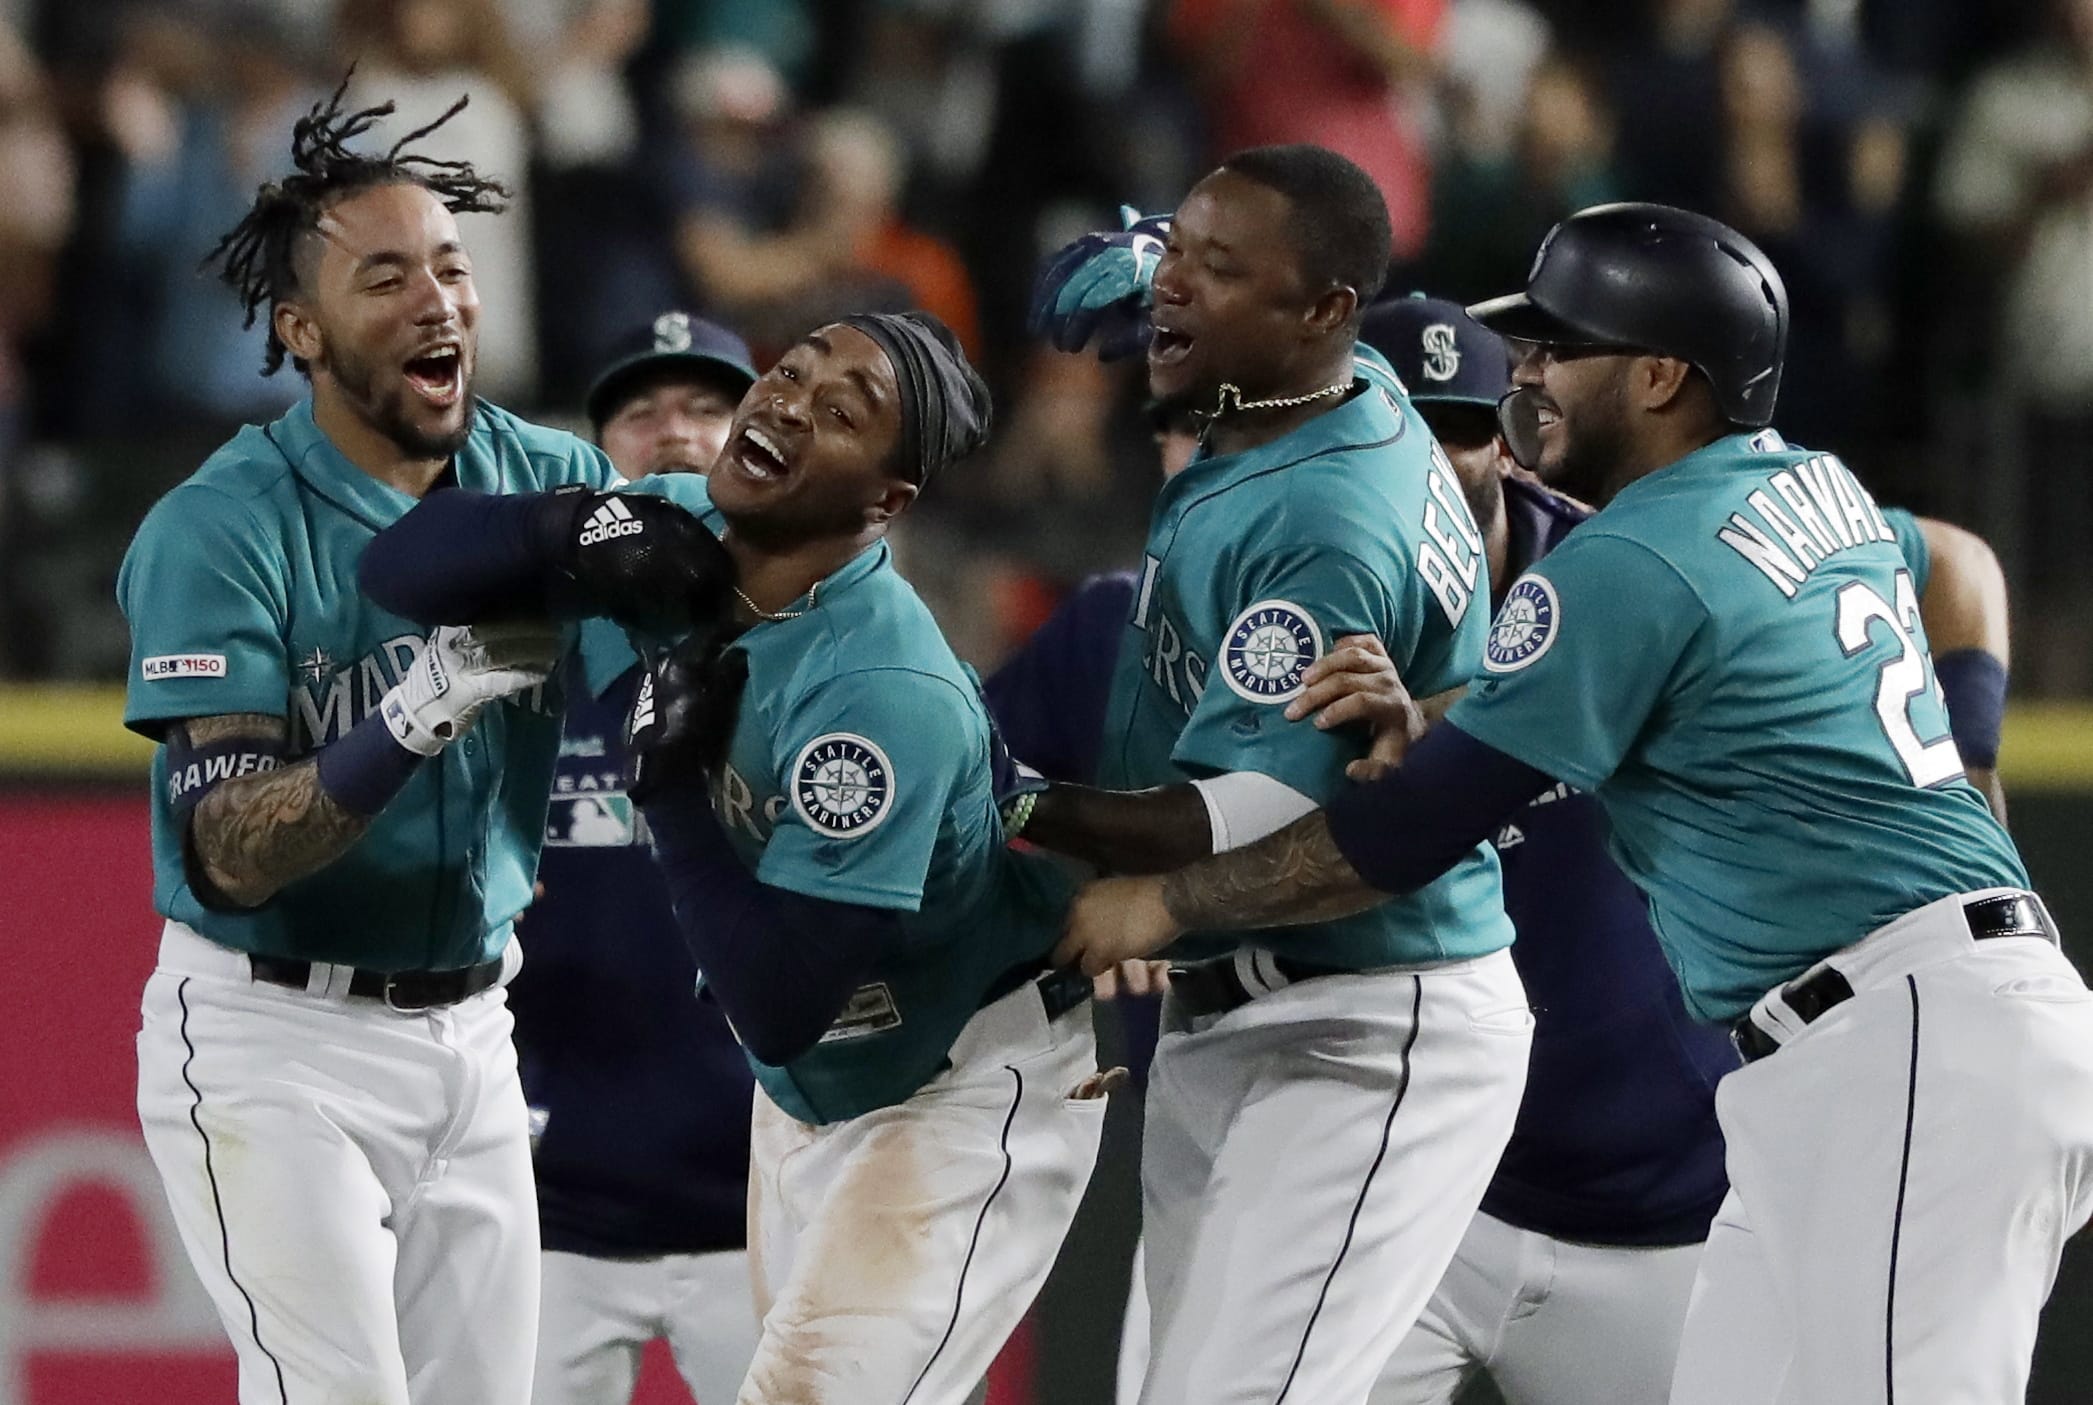 Seattle Mariners' Mallex Smith, second from left, is mobbed by teammates, including J.P. Crawford, left, Tim Beckham, second from right, and Omar Narvaez, right, after Smith hit a walk-off RBI single in the ninth inning of a baseball game against the Detroit Tigers to score Kyle Seager and give the Mariners a 3-2 win, Friday, July 26, 2019, in Seattle. (AP Photo/Ted S.